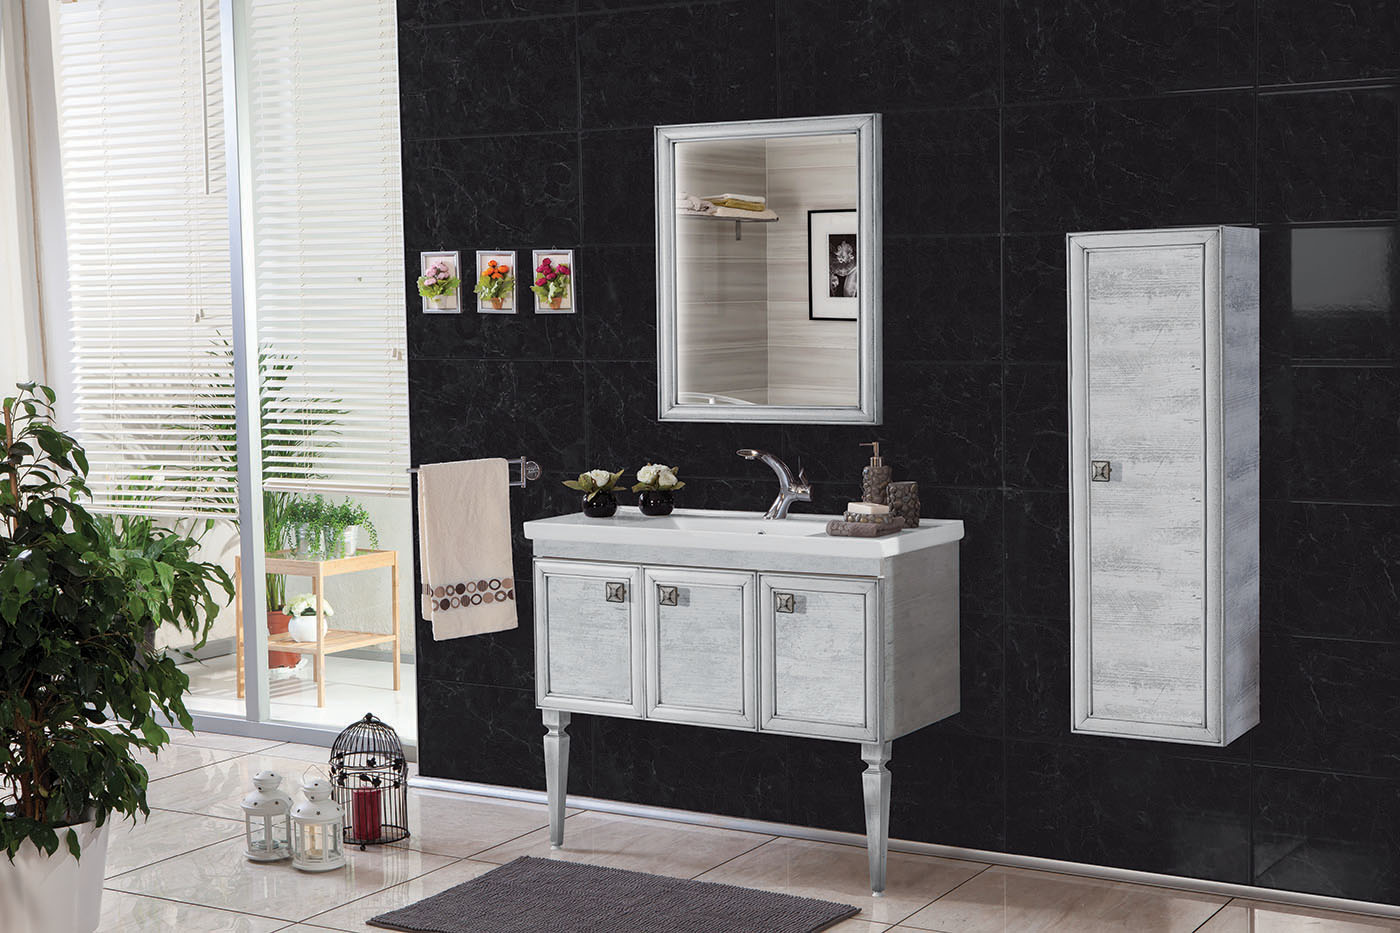 PRAGUE SERIES – CabinetArts Cabinetry | Quality Kitchen Cabinets ...